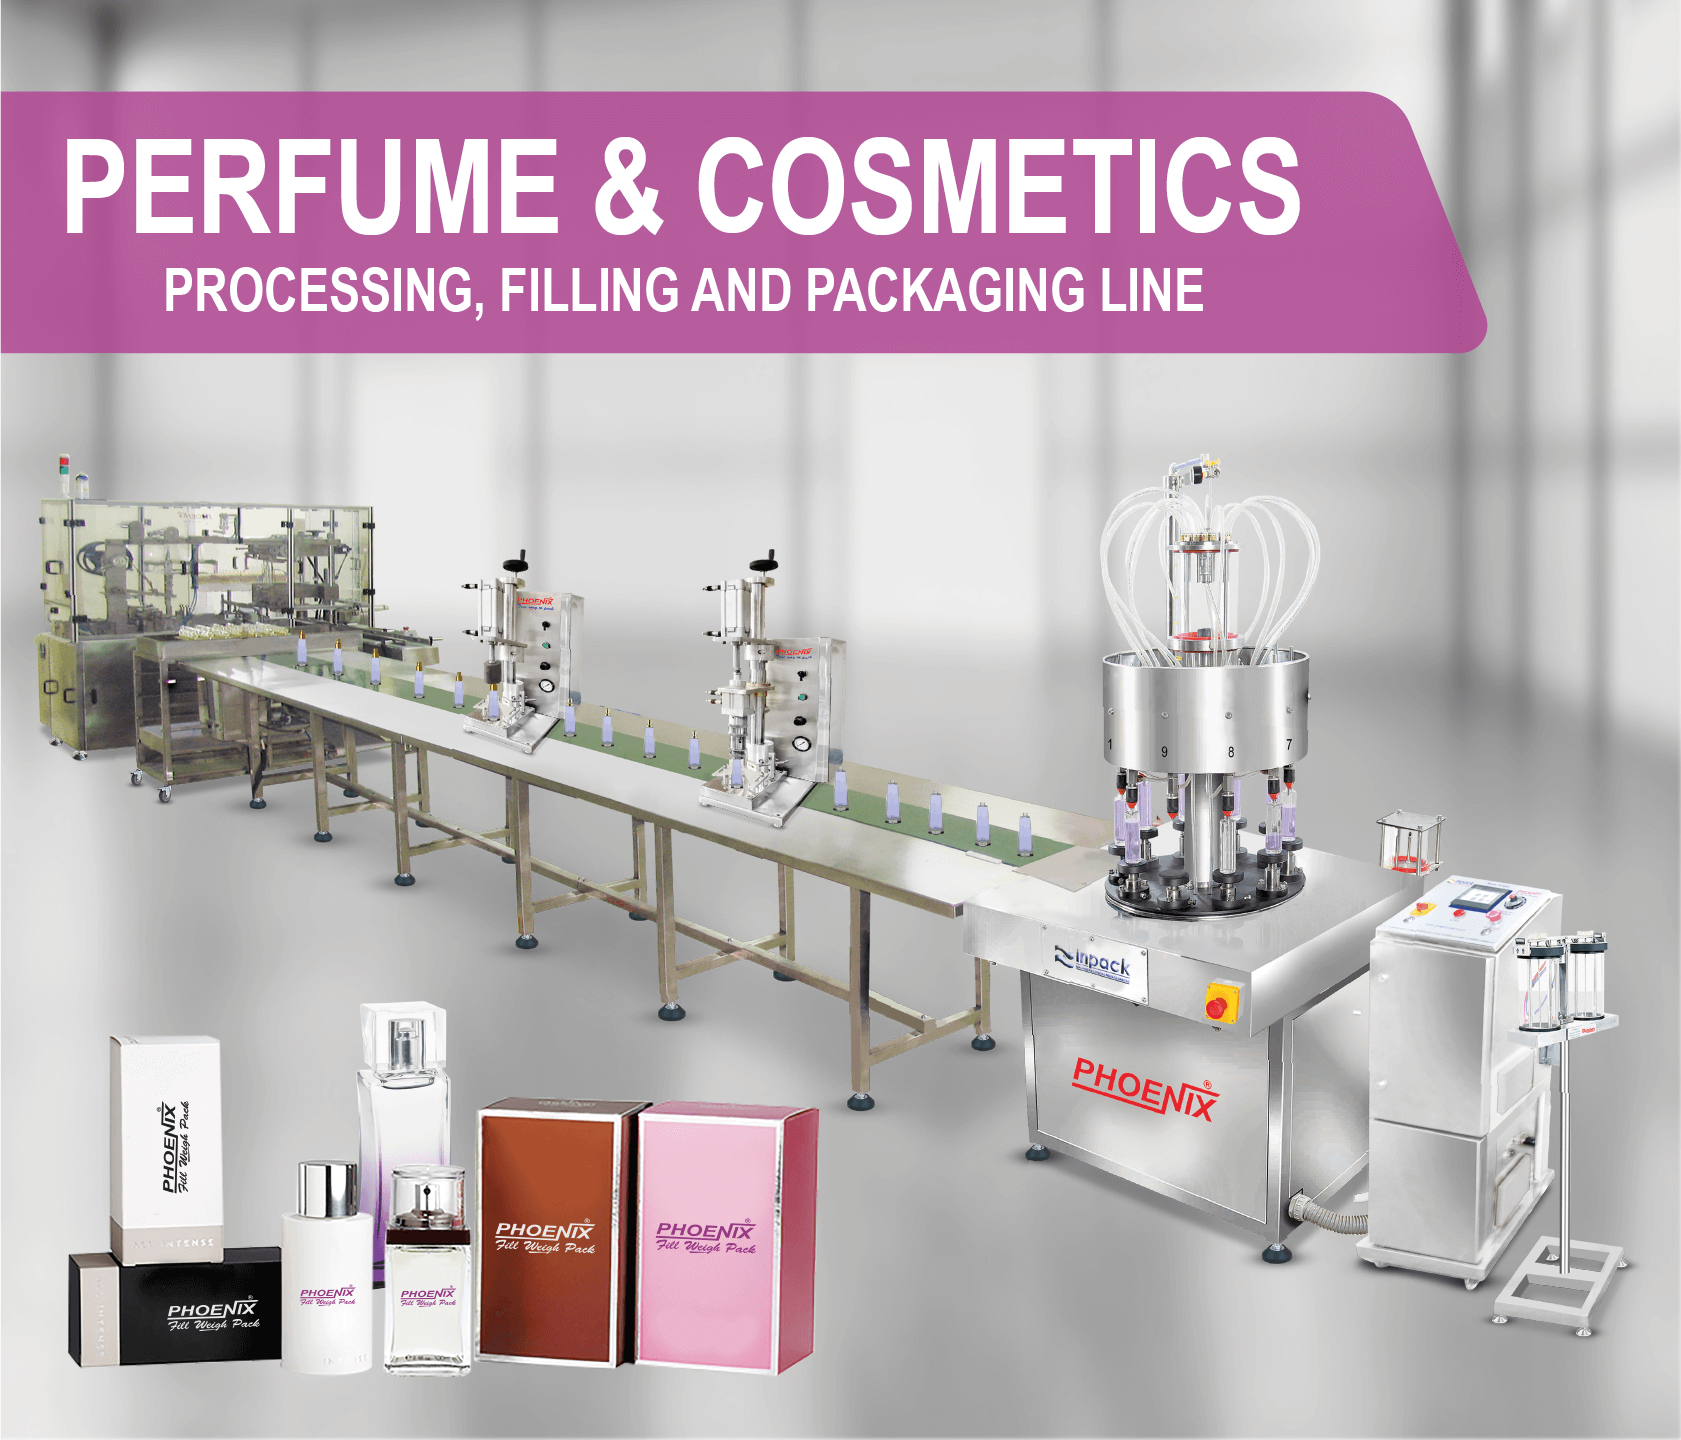 Perfume & Cosmetics, Processing, Filling and Packaging Line